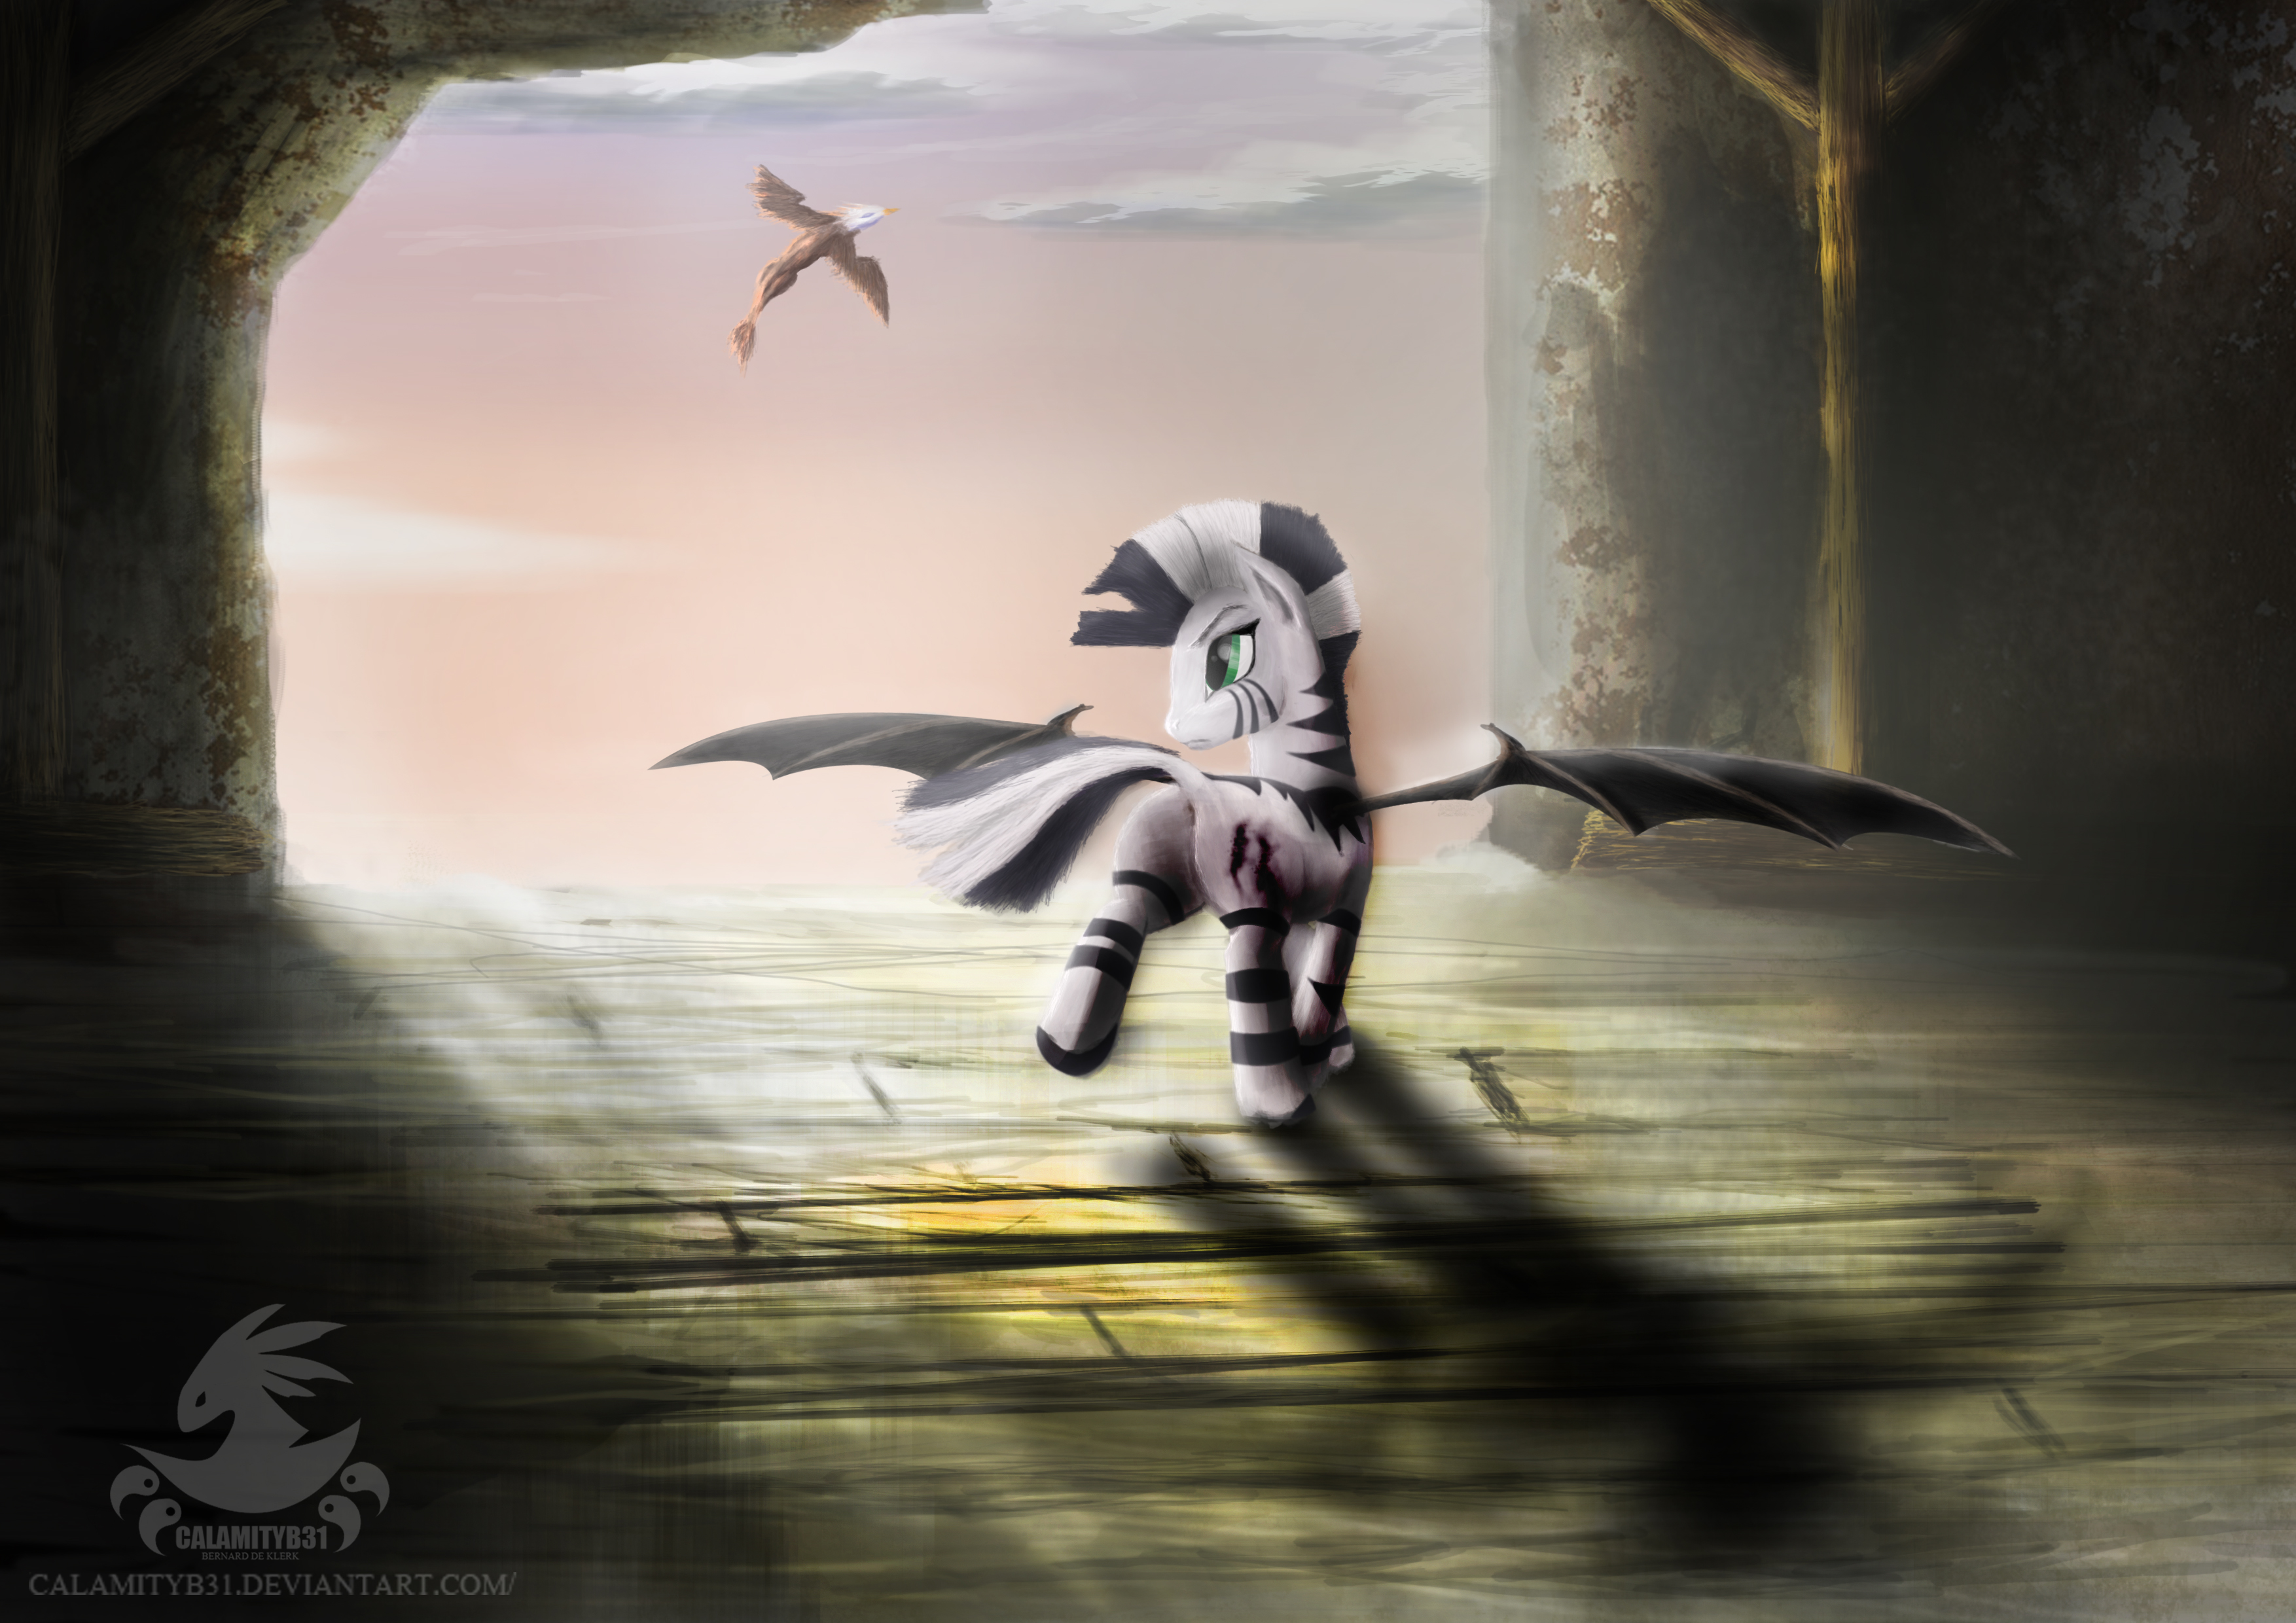 Xenith Pursuing Stern {Batwings} by CalamityB31